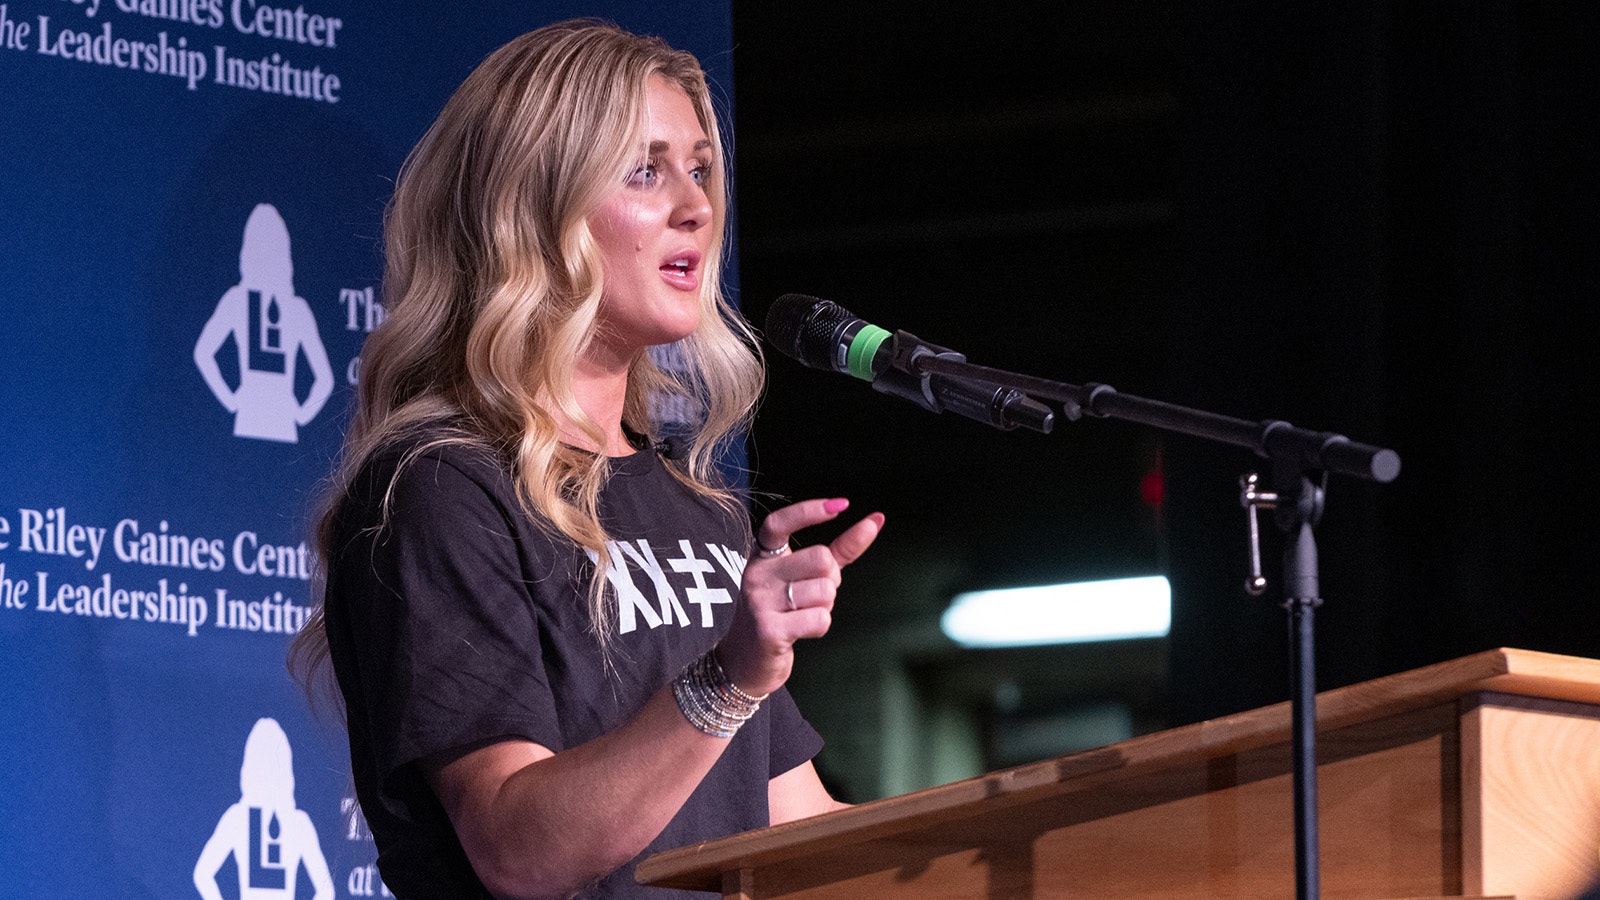 Riley Gaines during a stop on her "Speak Louder" tour at the University of Wyoming in Laramie on Tuesday.